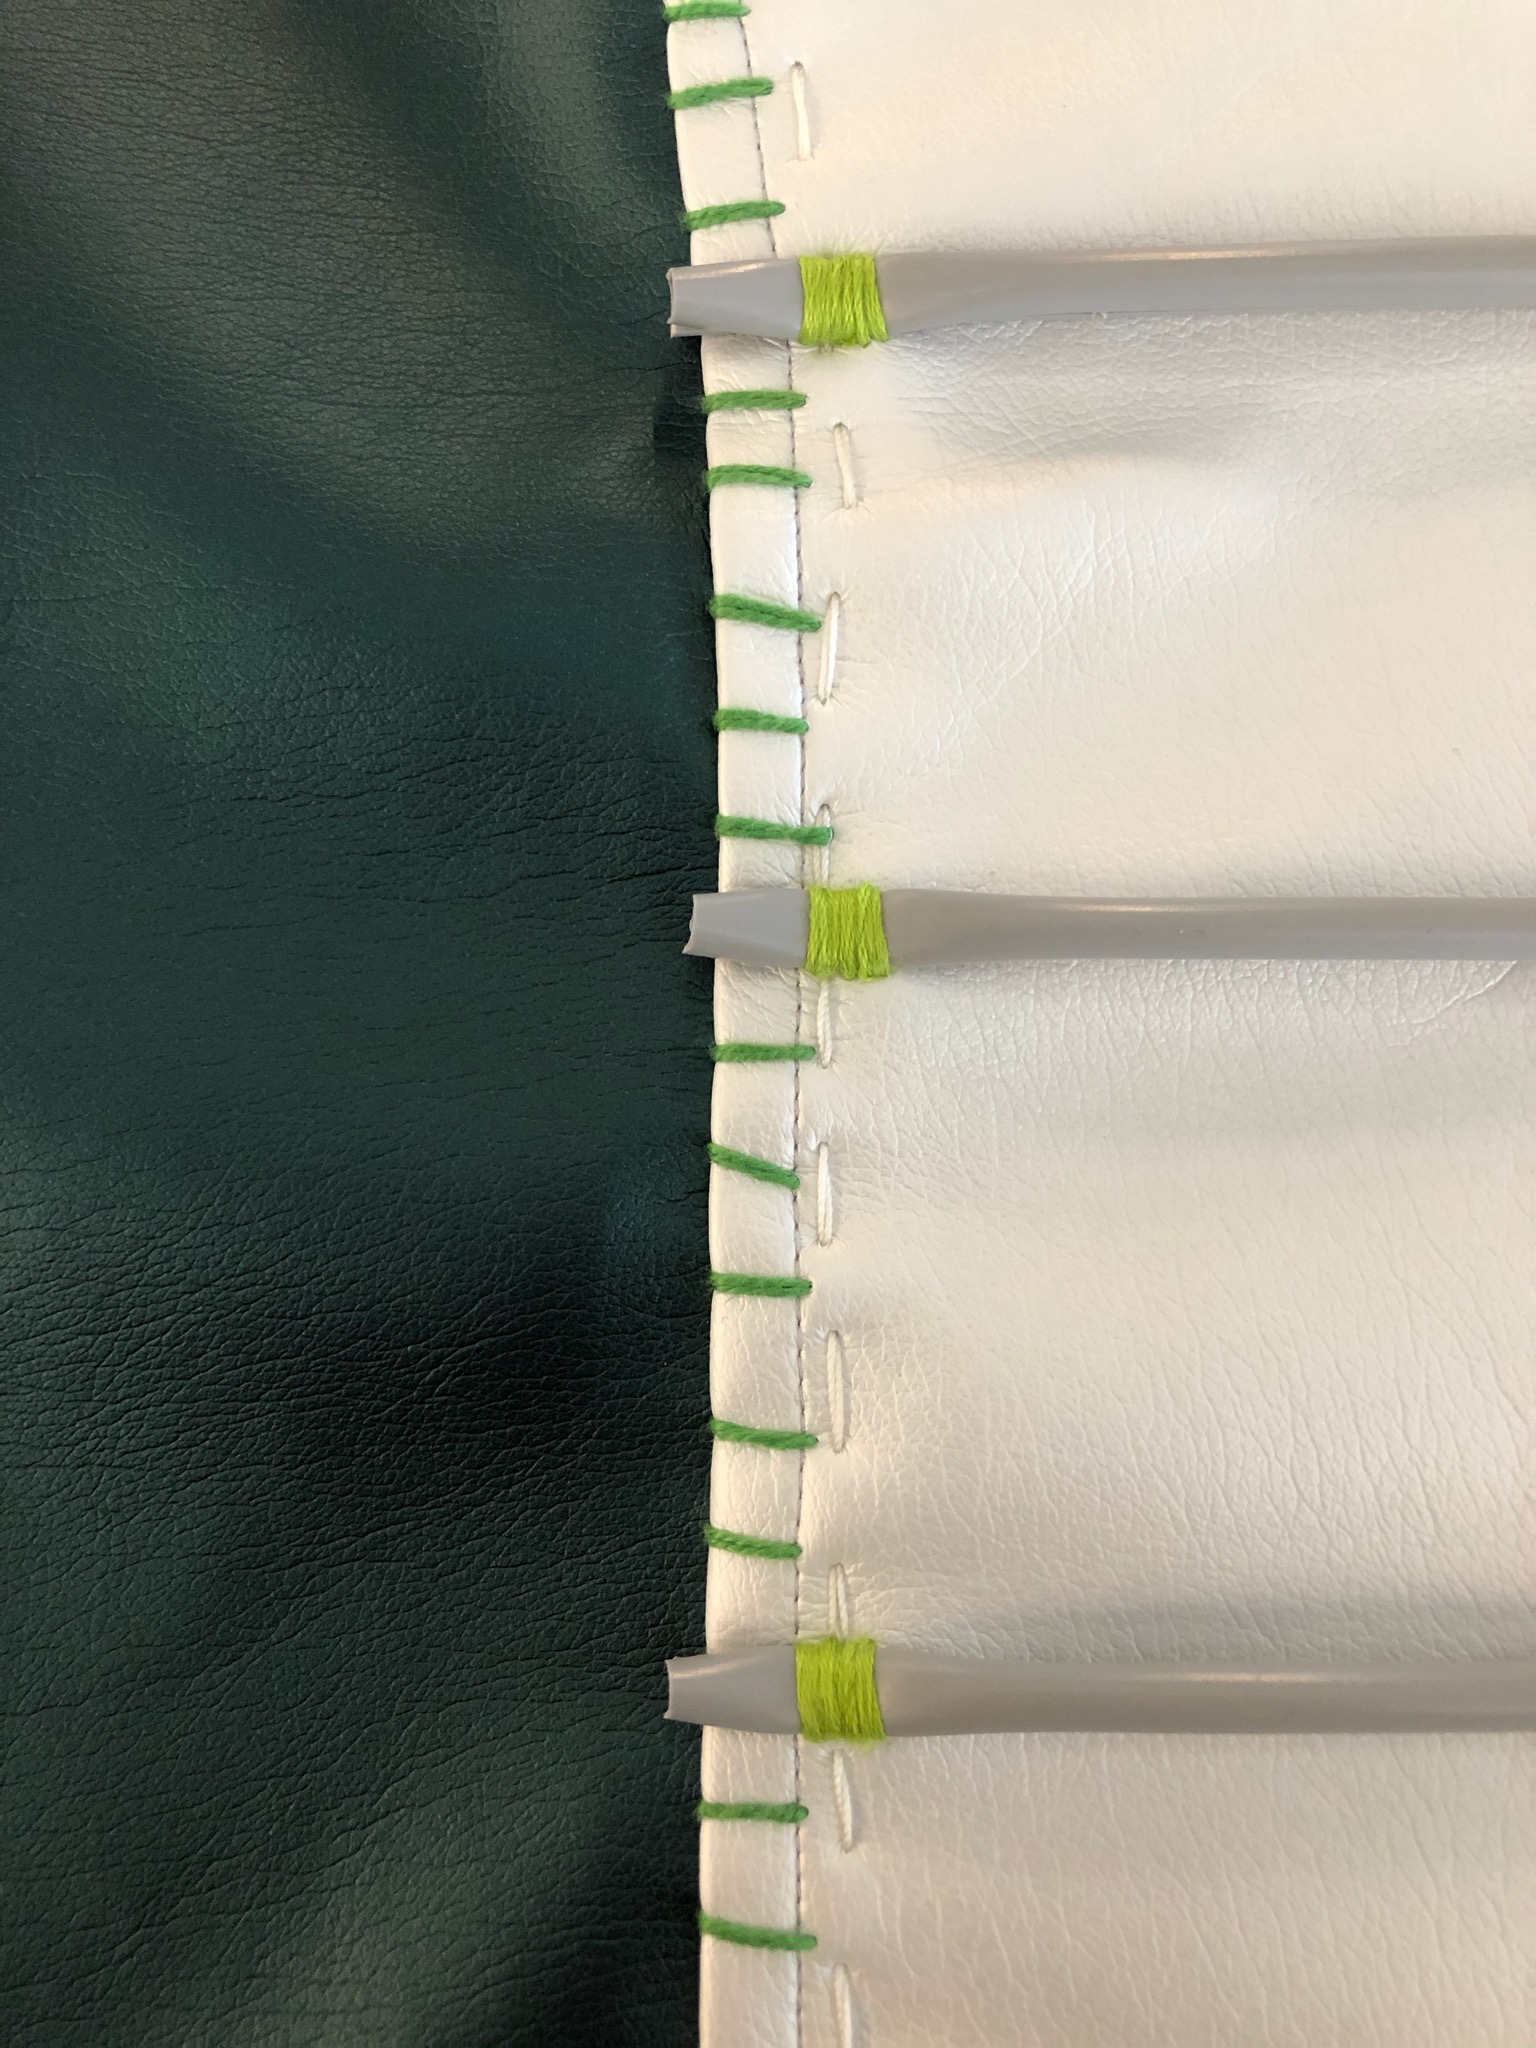 Close-up on the stitching of the dress